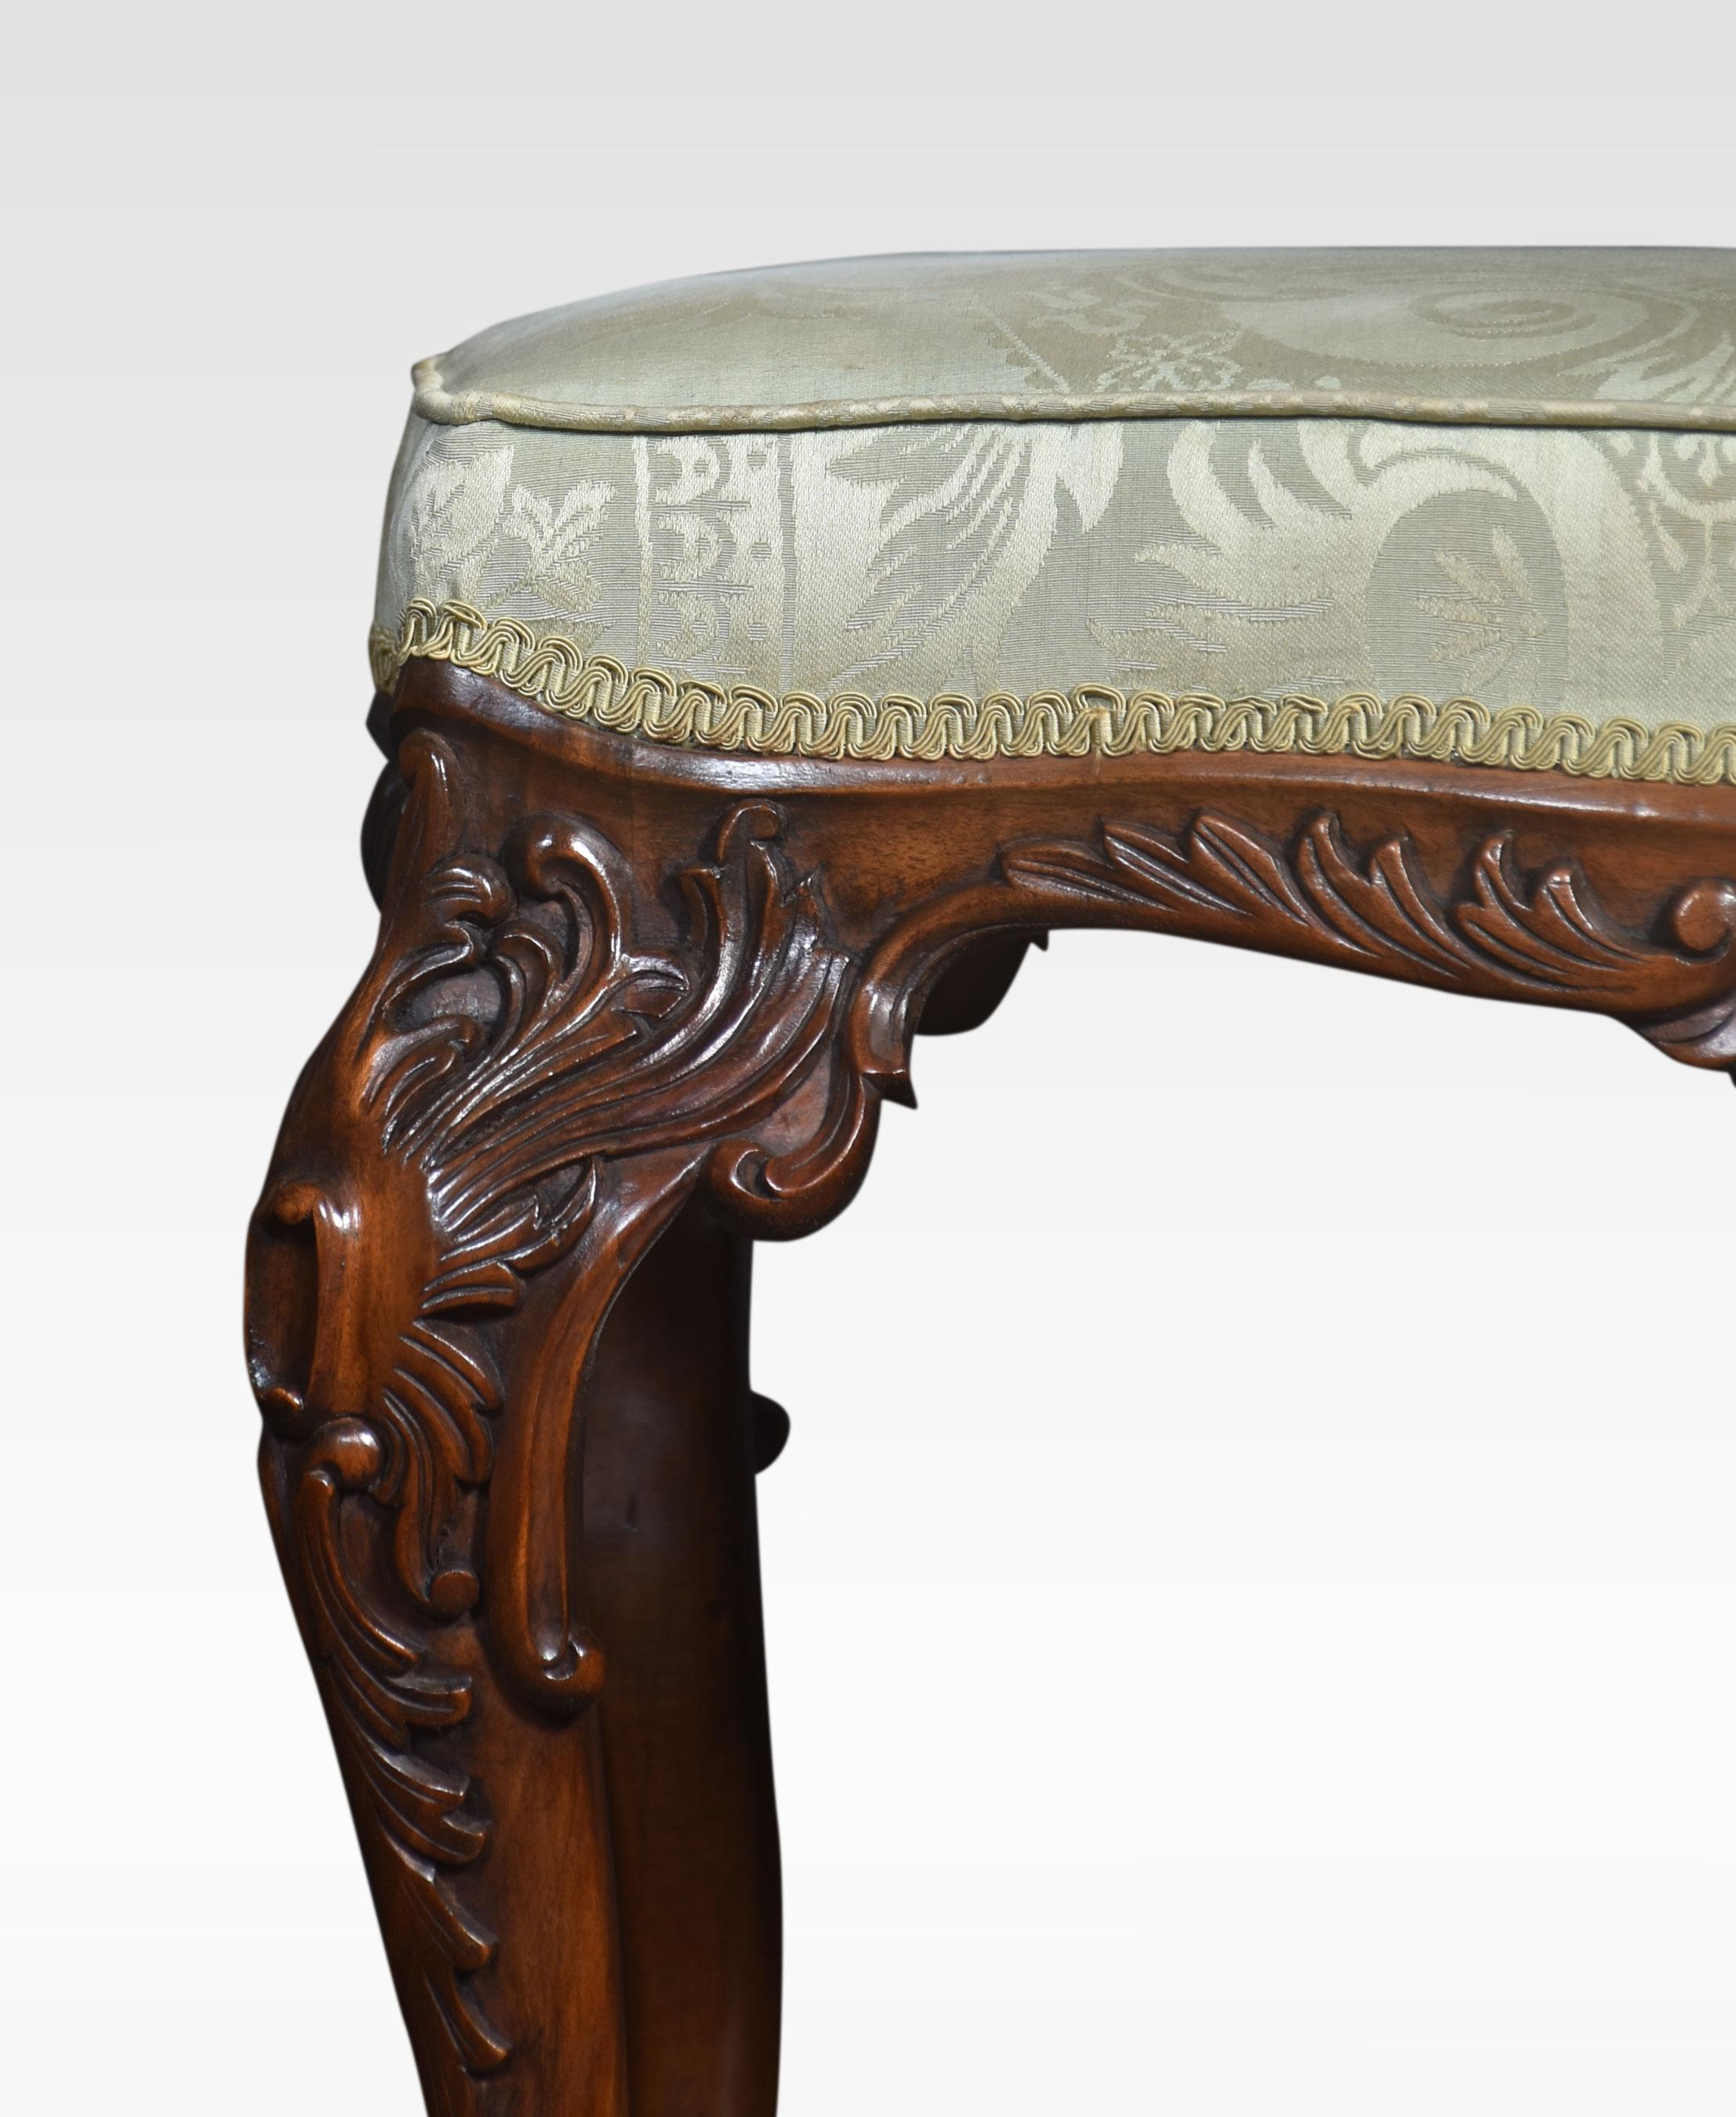 Chippendale style mahogany framed stool, the upholstered seat which is in serviceable condition, to the carved moulded freeze raised up on four crisply carved cabriole supports terminating in claw and ball feet.
Dimensions
Height 20 Inches
Width 24